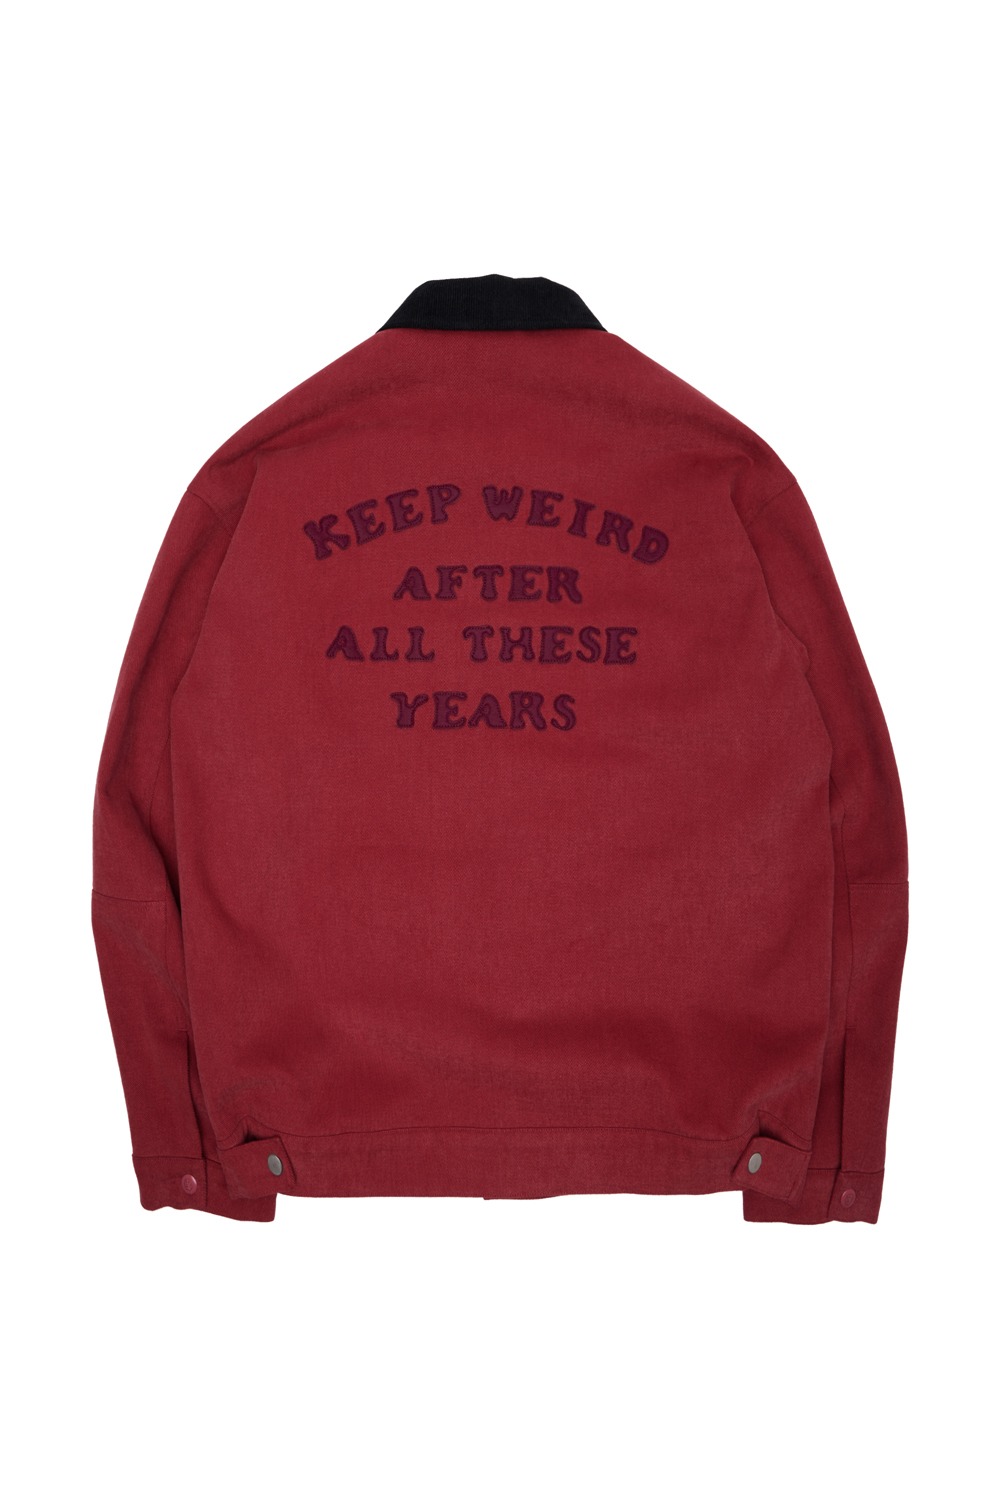 Gallery Work Jacket - Washed Red